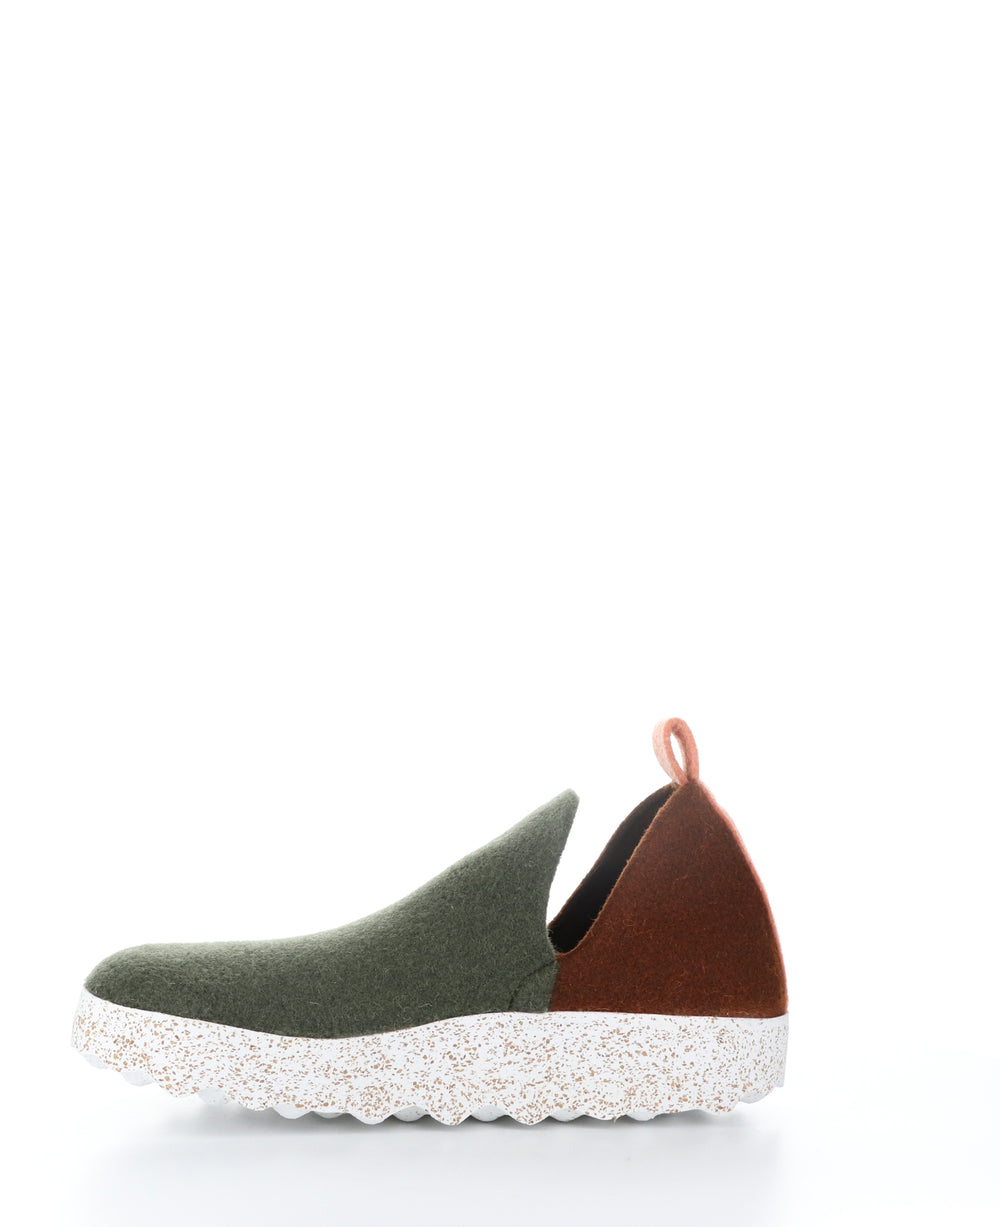 CITY086ASP Mil Grn/Brn/Tang Round Toe Shoes